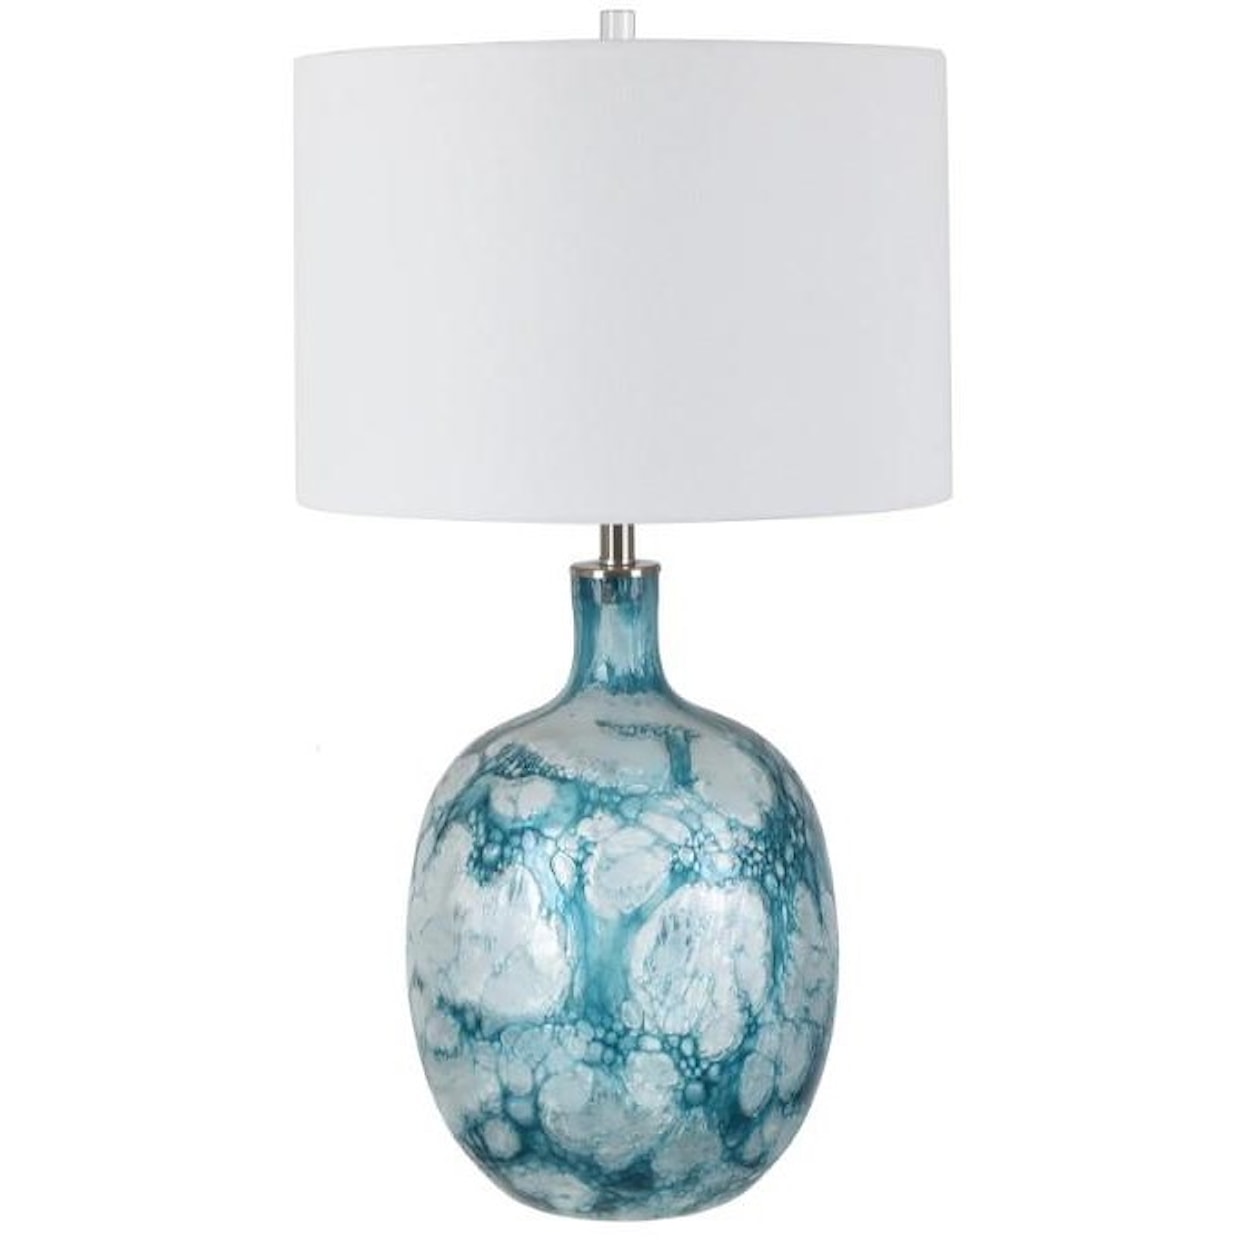 Crestview Collection Lighting Talulah Table Lamp